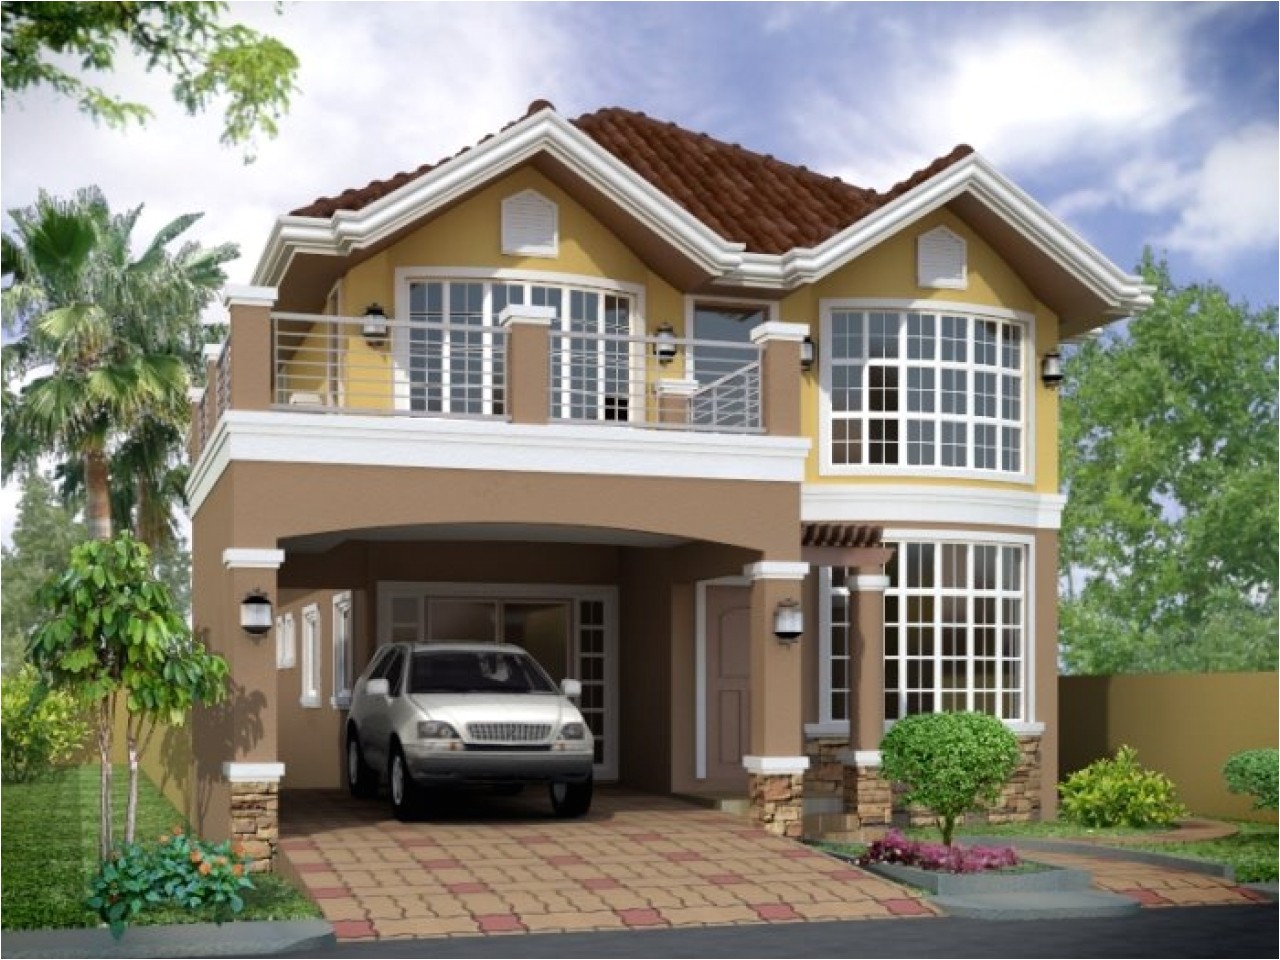 Small Beautiful Home Plans Modern Home Design Small Houses Small Home House Design